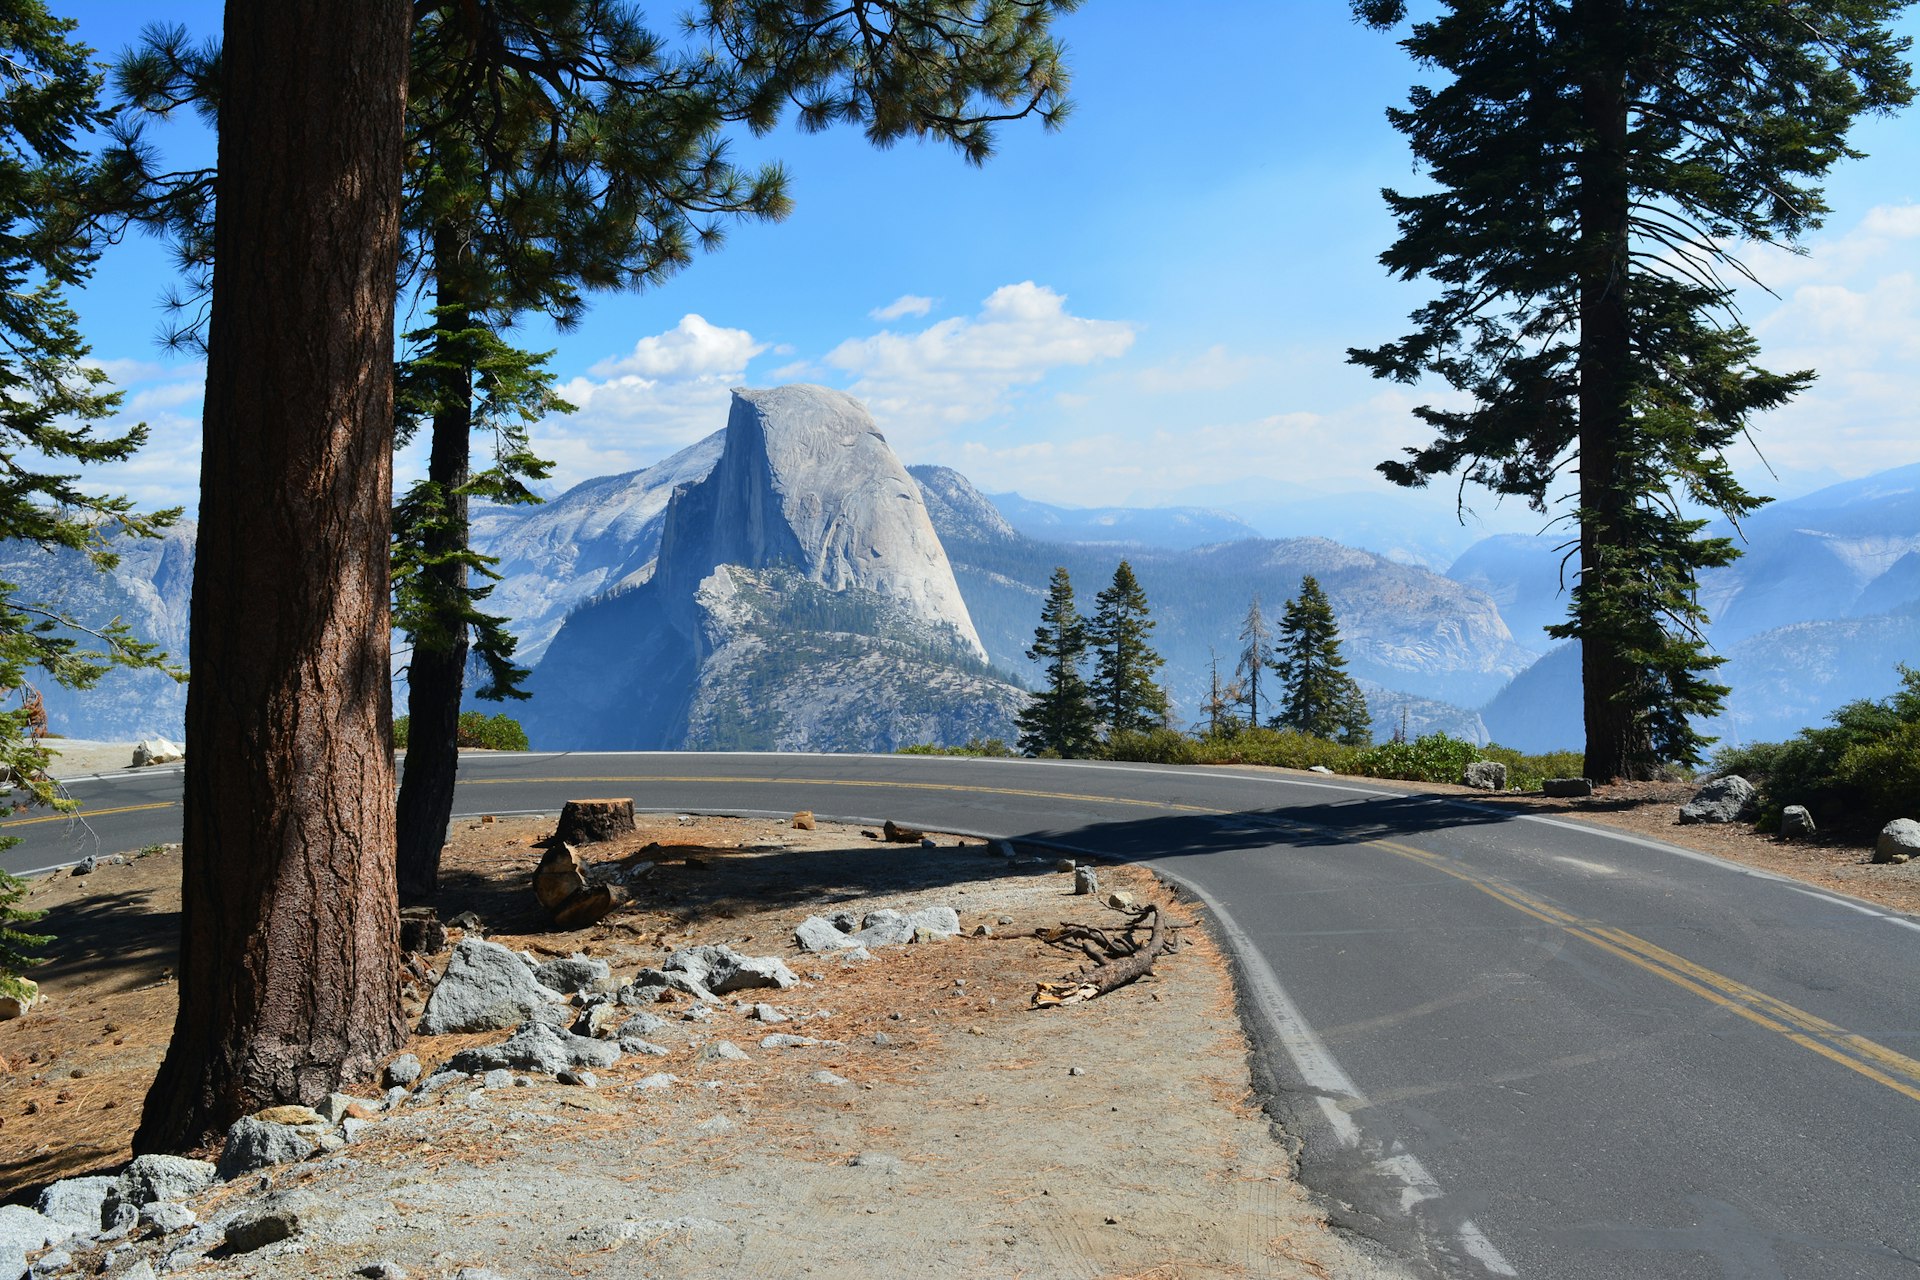 A road bends on the edge of a viewpoint looking towards Yosemite's famous Half Dome, a huge rock structure in the shape of a dome cut in half